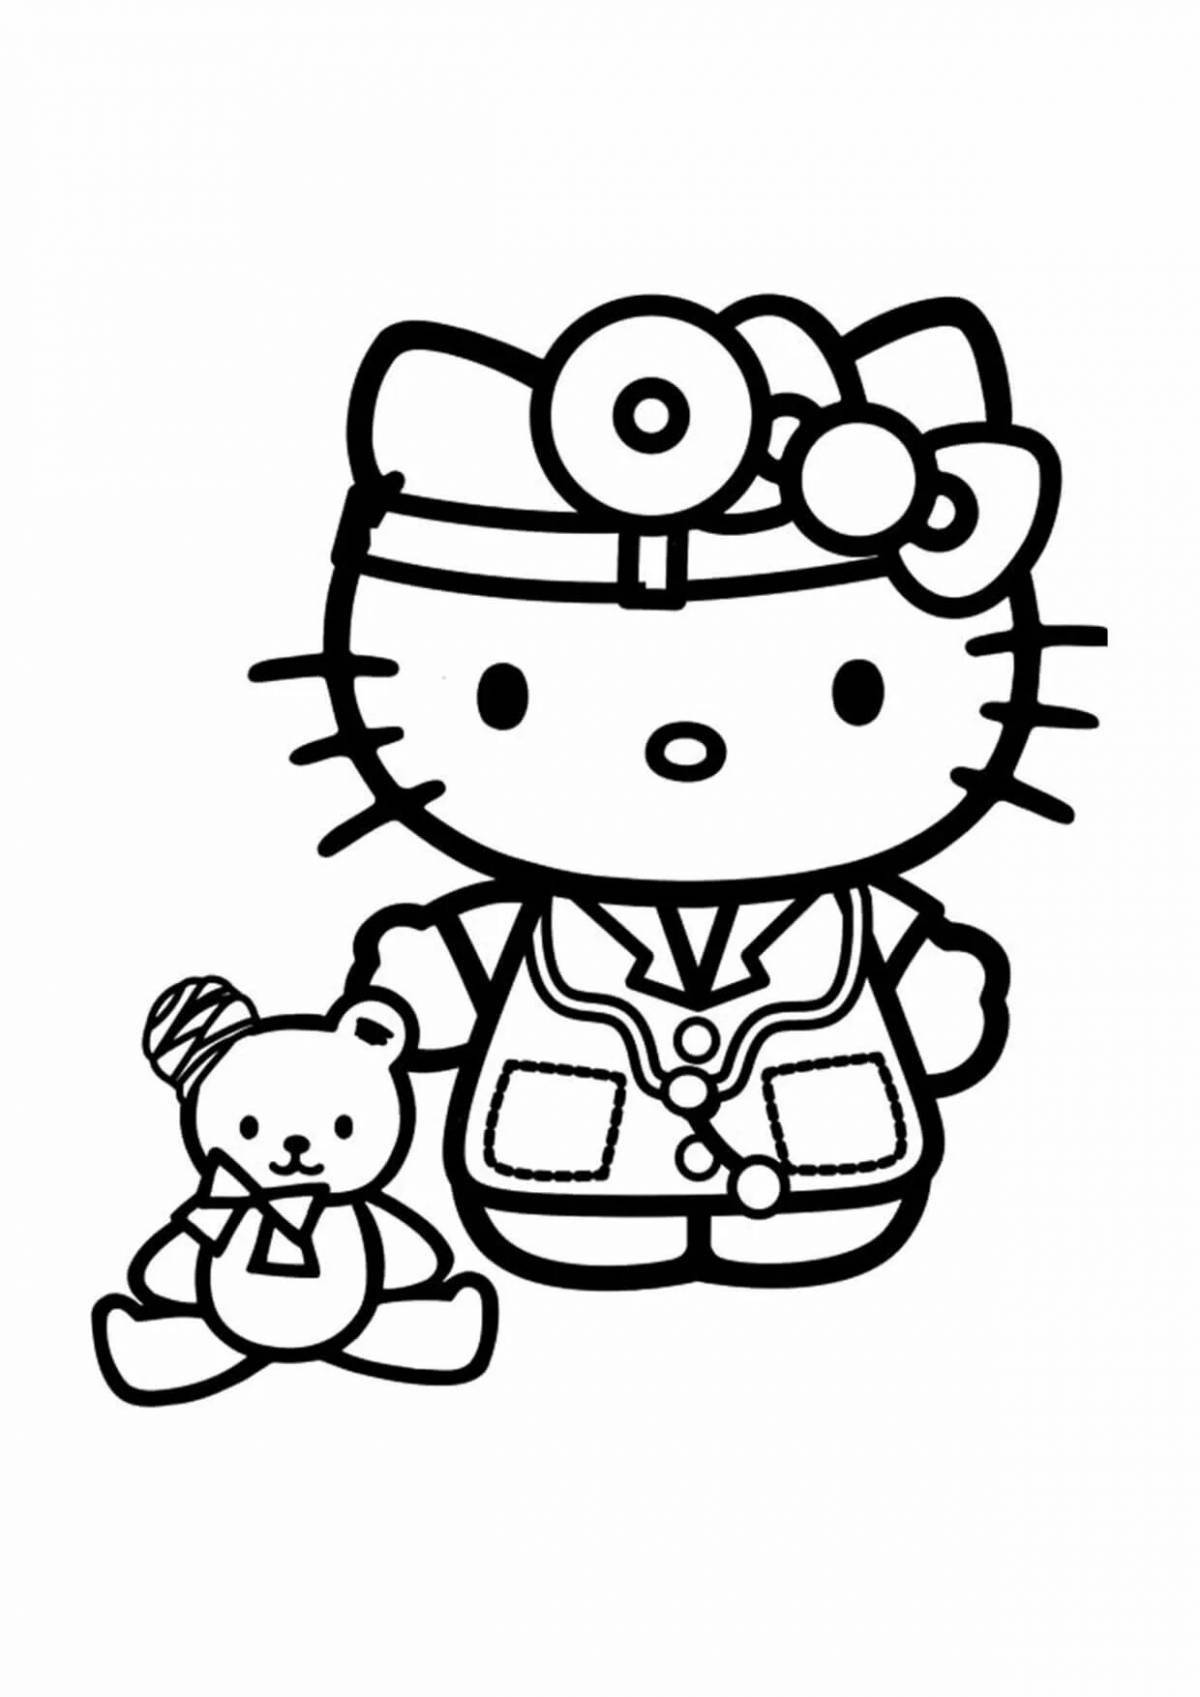 Divine hello kitty demon coloring page